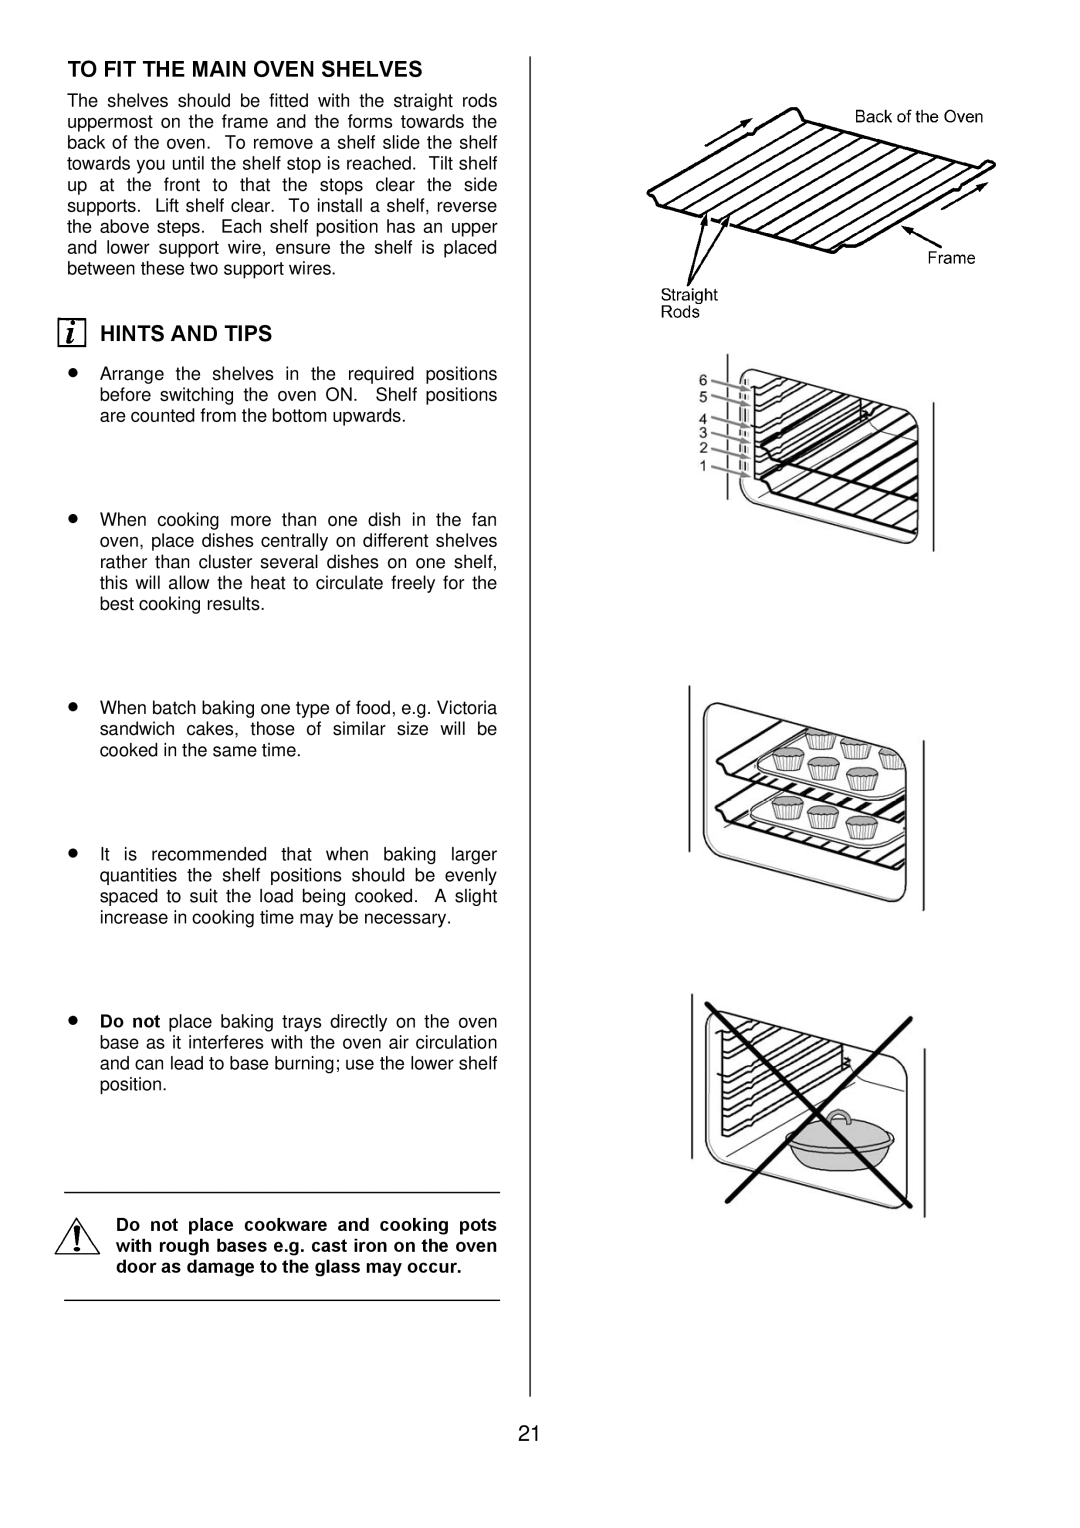 Electrolux D98000VF operating instructions To FIT the Main Oven Shelves, Hints and Tips 